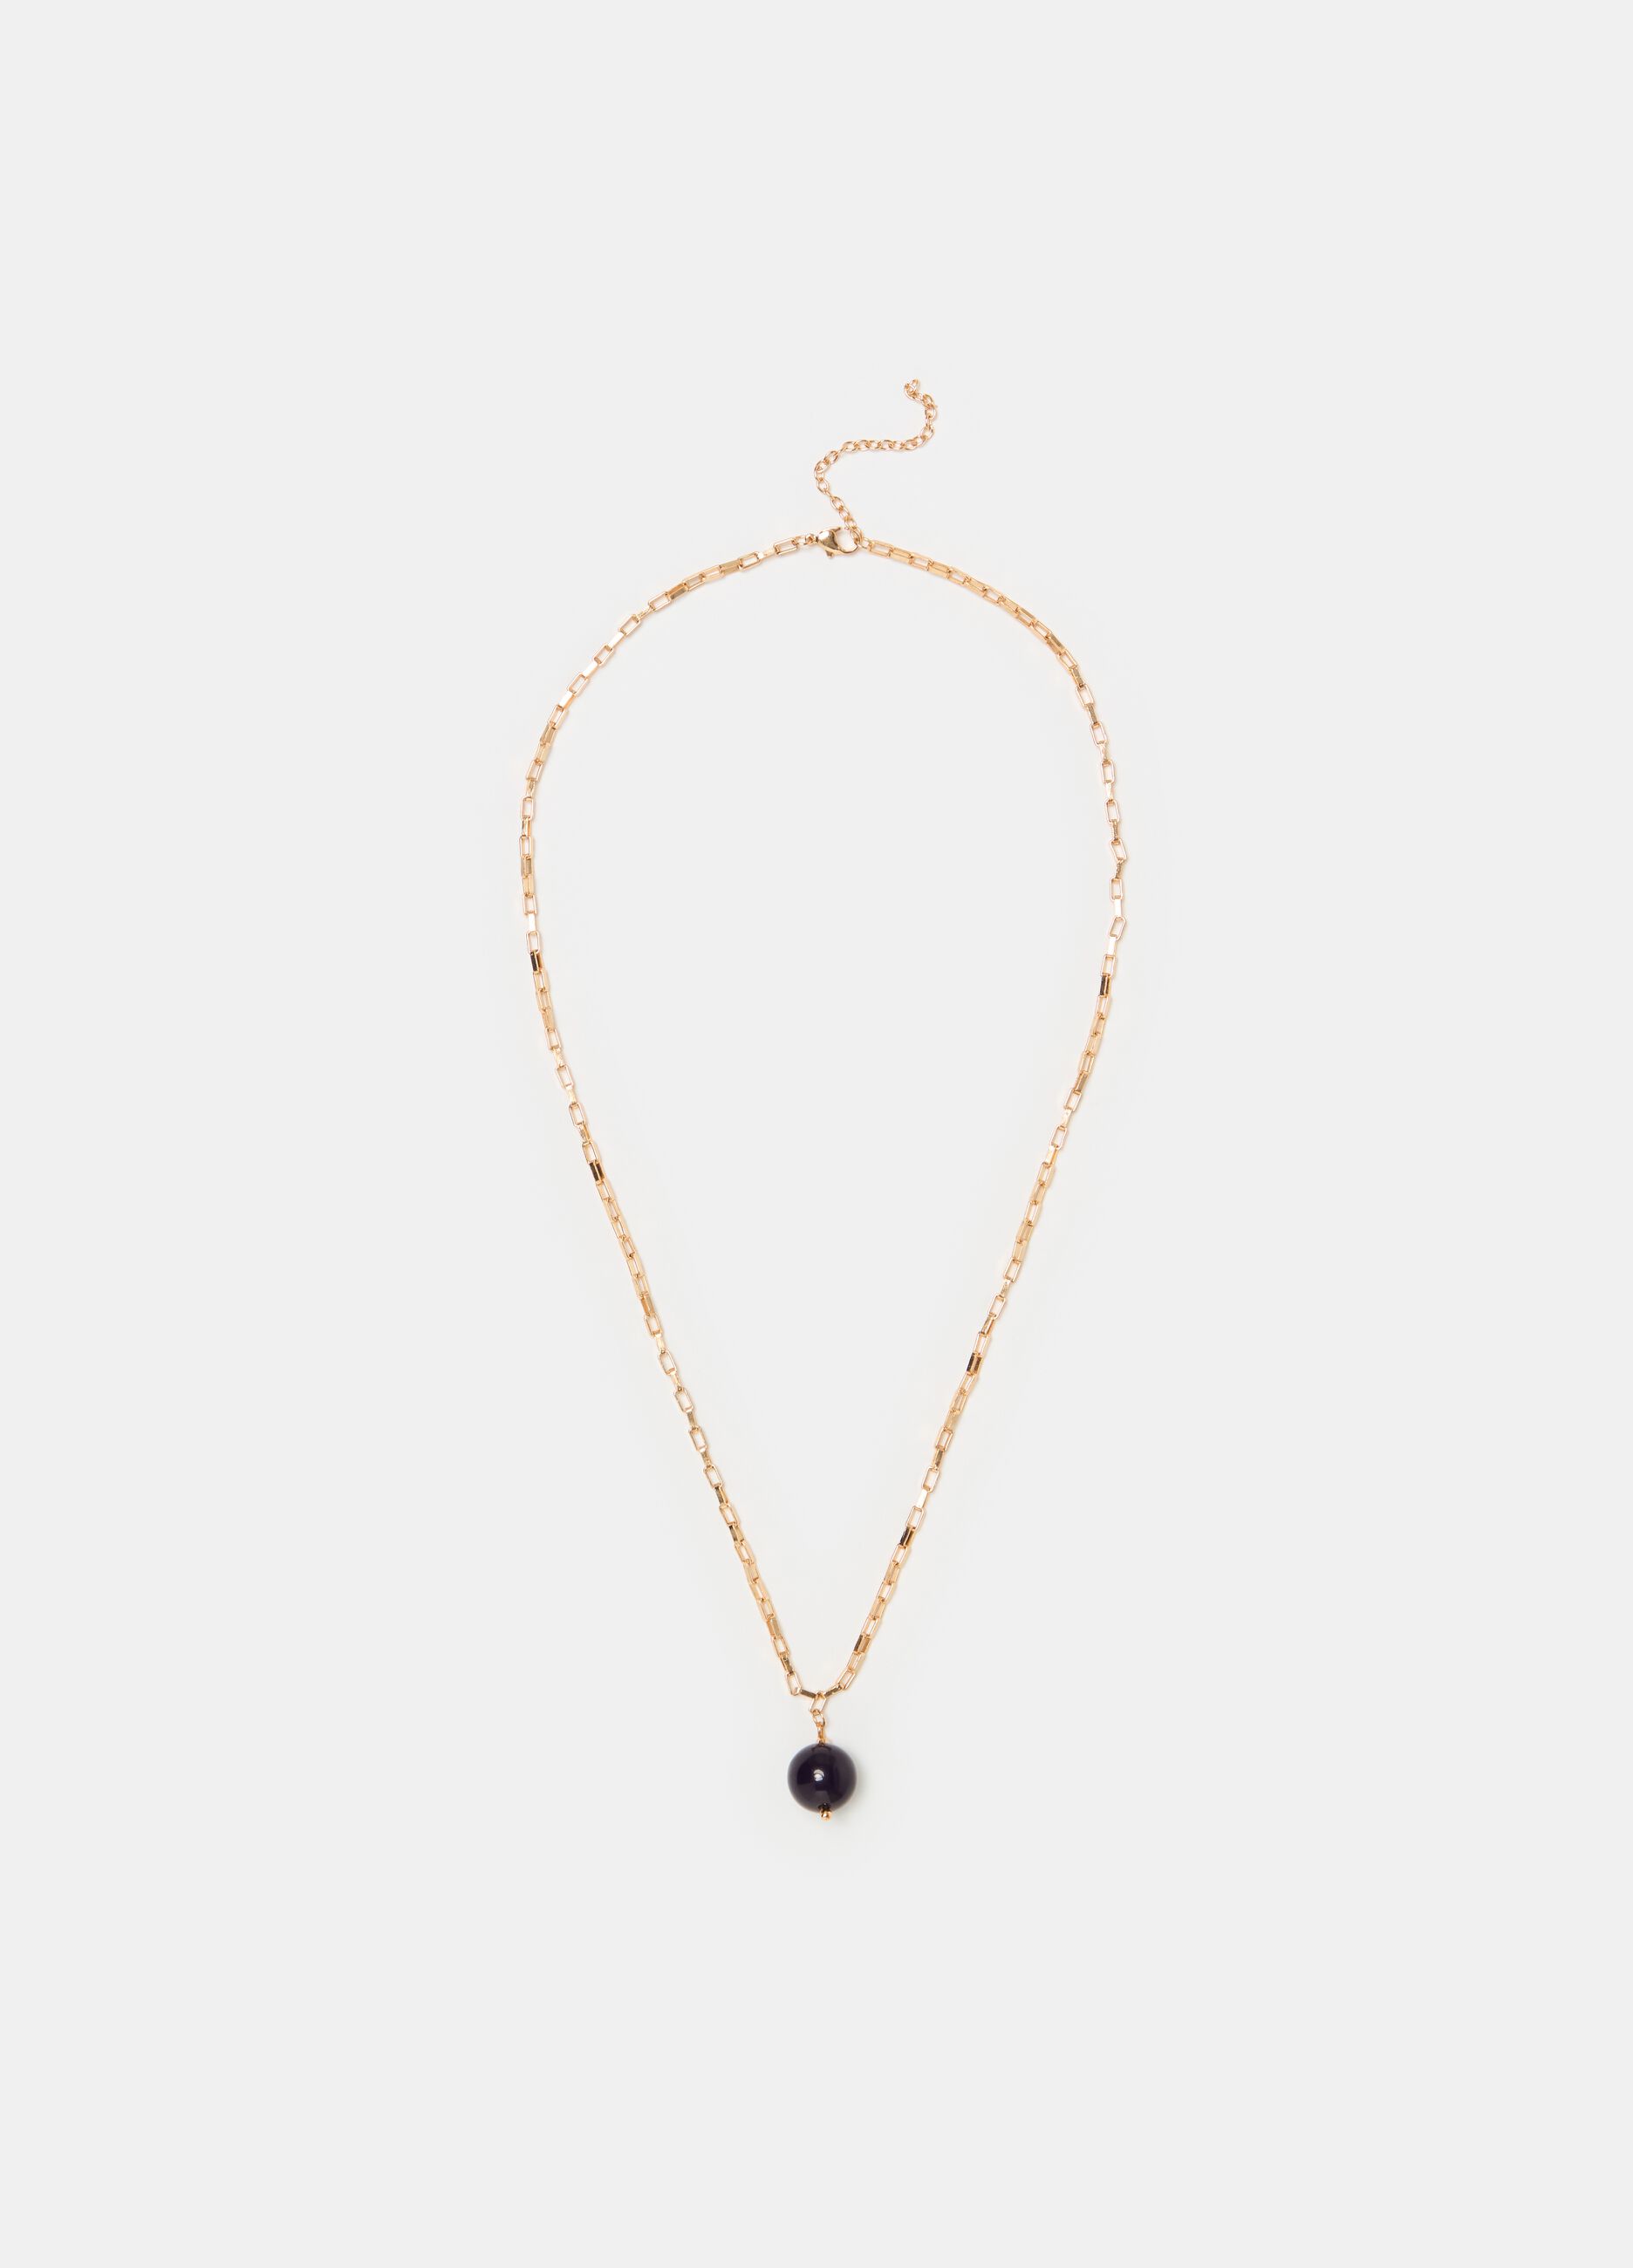 Slim chain necklace with pendant